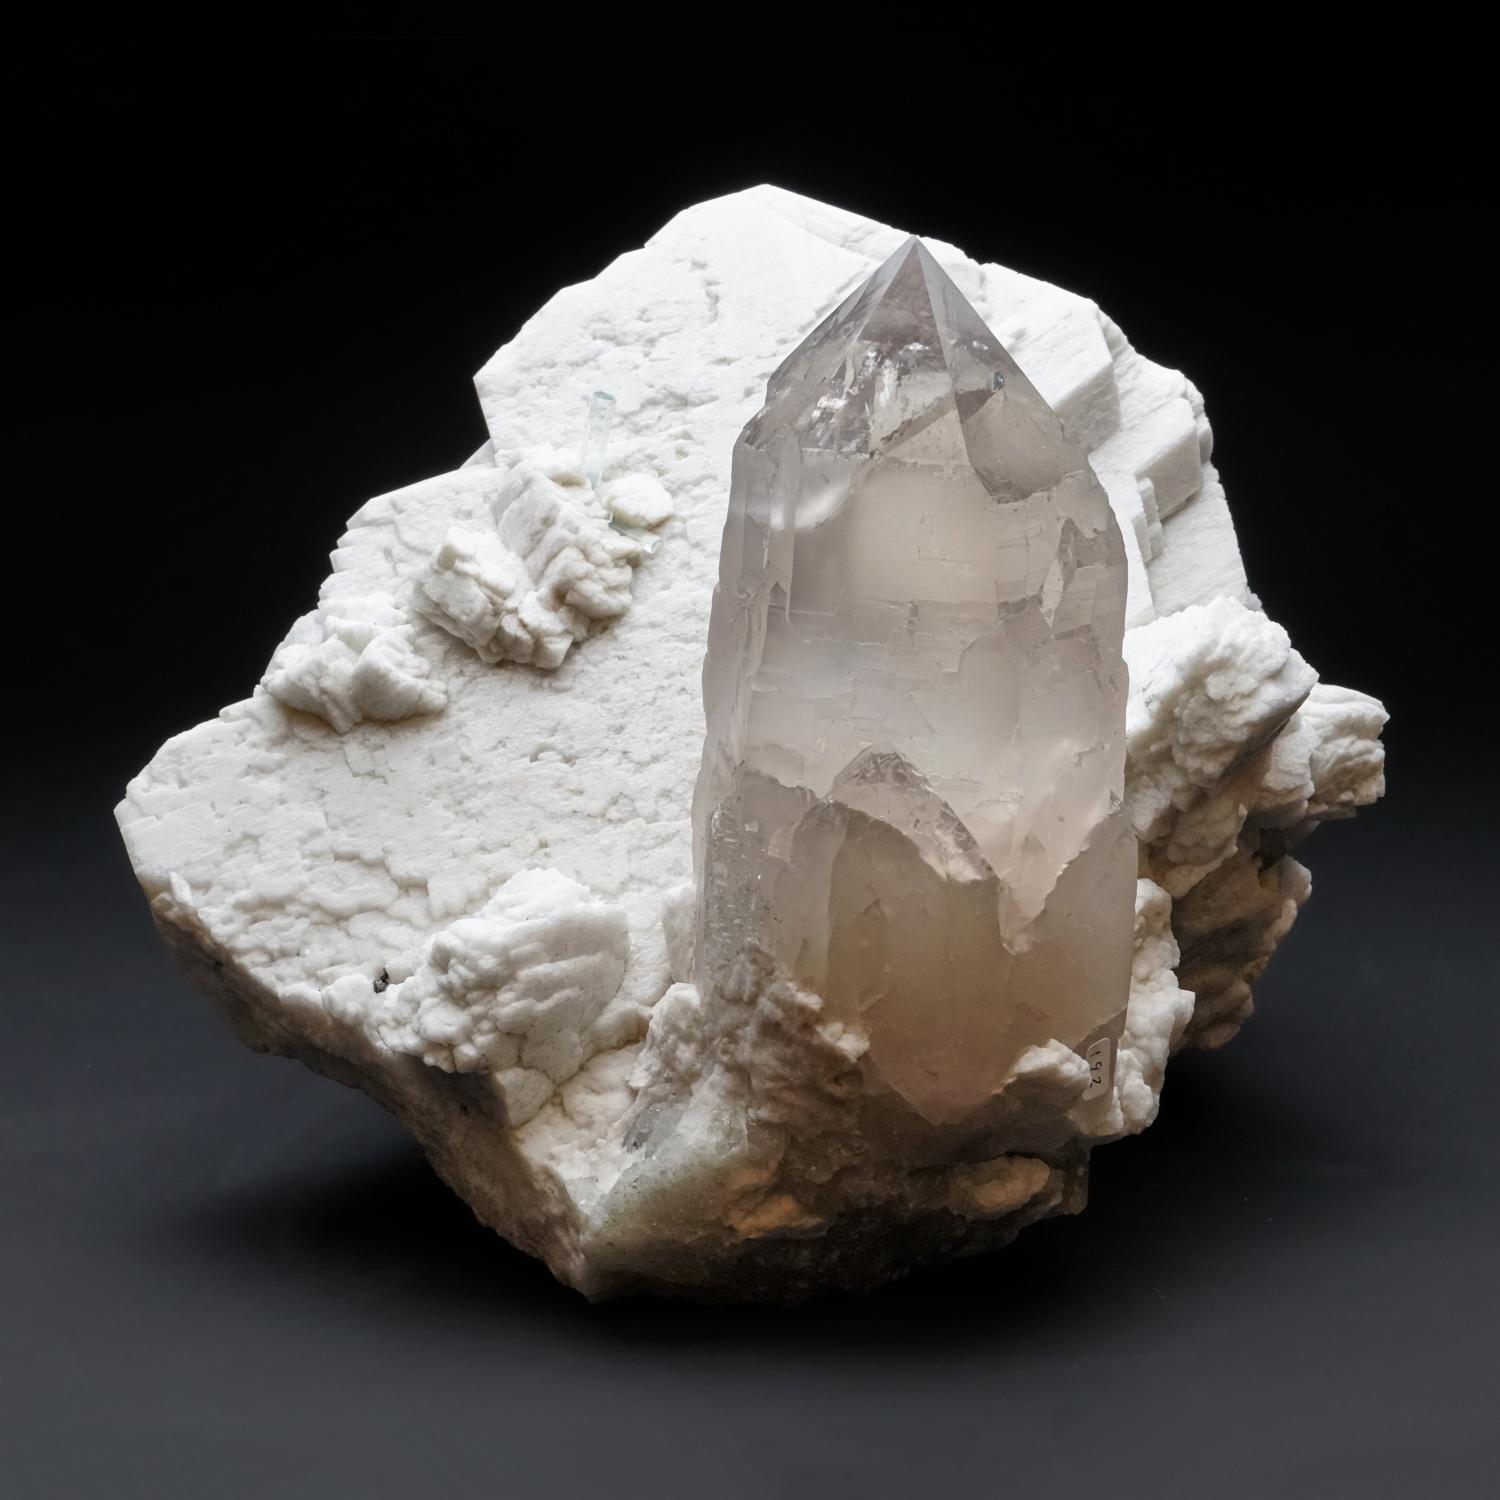 Huge, museum-quality, Himalayan quartz generator crystal, sitting on a large, white Feldspar crystal, both perfectly terminated with top luster. This piece is a magnificent combination of rare quartz specimens - found at an elevation of 8000 meters